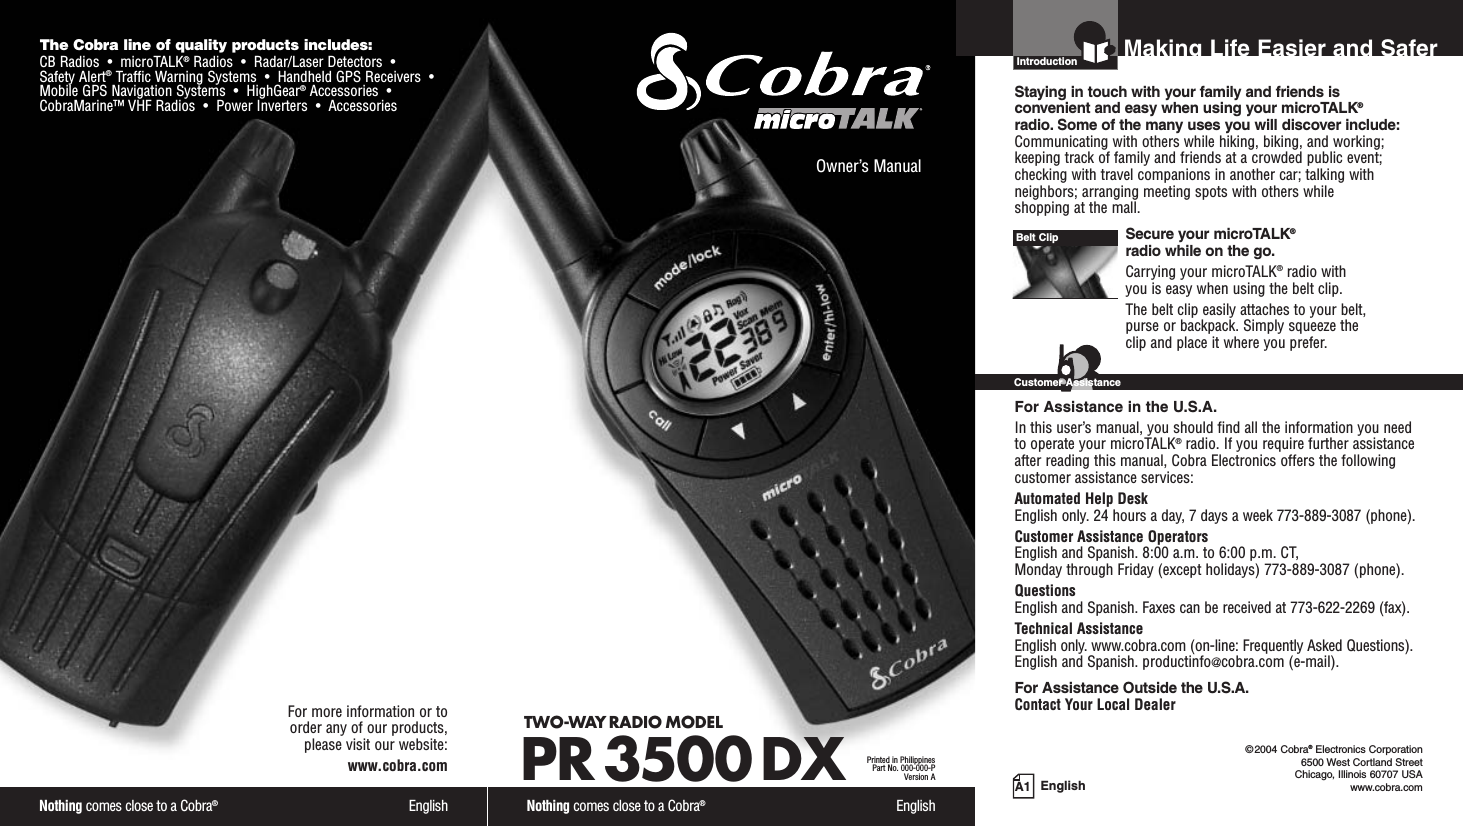 Nothing comes close to a Cobra®EnglishThe Cobra line of quality products includes:CB Radios  •  microTALK®Radios  •  Radar/Laser Detectors  •Safety Alert®Traffic Warning Systems  •  Handheld GPS Receivers  •Mobile GPS Navigation Systems  •  HighGear®Accessories  •CobraMarine™ VHF Radios  •  Power Inverters  •  AccessoriesFor more information or to order any of our products, please visit our website:www.cobra.comA1 EnglishMaking Life Easier and SaferOwner’s ManualNothing comes close to a Cobra®EnglishTWO-WAY RADIO MODEL PR 3500 DXPrinted in PhilippinesPart No. 000-000-PVersion AIntroductionStaying in touch with your family and friends is convenient and easy when using your microTALK®radio. Some of the many uses you will discover include:Communicating with others while hiking, biking, and working;keeping track of family and friends at a crowded public event;checking with travel companions in another car; talking withneighbors; arranging meeting spots with others while shopping at the mall.Secure your microTALK®radio while on the go.Carrying your microTALK®radio with you is easy when using the belt clip. The belt clip easily attaches to your belt, purse or backpack. Simply squeeze the clip and place it where you prefer.For Assistance in the U.S.A.In this user’s manual, you should find all the information you needto operate your microTALK®radio. If you require further assistanceafter reading this manual, Cobra Electronics offers the followingcustomer assistance services:Automated Help Desk English only. 24 hours a day, 7 days a week 773-889-3087 (phone). Customer Assistance OperatorsEnglish and Spanish. 8:00 a.m. to 6:00 p.m. CT, Monday through Friday (except holidays) 773-889-3087 (phone). QuestionsEnglish and Spanish. Faxes can be received at 773-622-2269 (fax). Technical AssistanceEnglish only. www.cobra.com (on-line: Frequently Asked Questions). English and Spanish. productinfo@cobra.com (e-mail).For Assistance Outside the U.S.A.Contact Your Local DealerBelt ClipCustomer Assistance©2004 Cobra®Electronics Corporation6500 West Cortland StreetChicago, Illinois 60707 USAwww.cobra.com